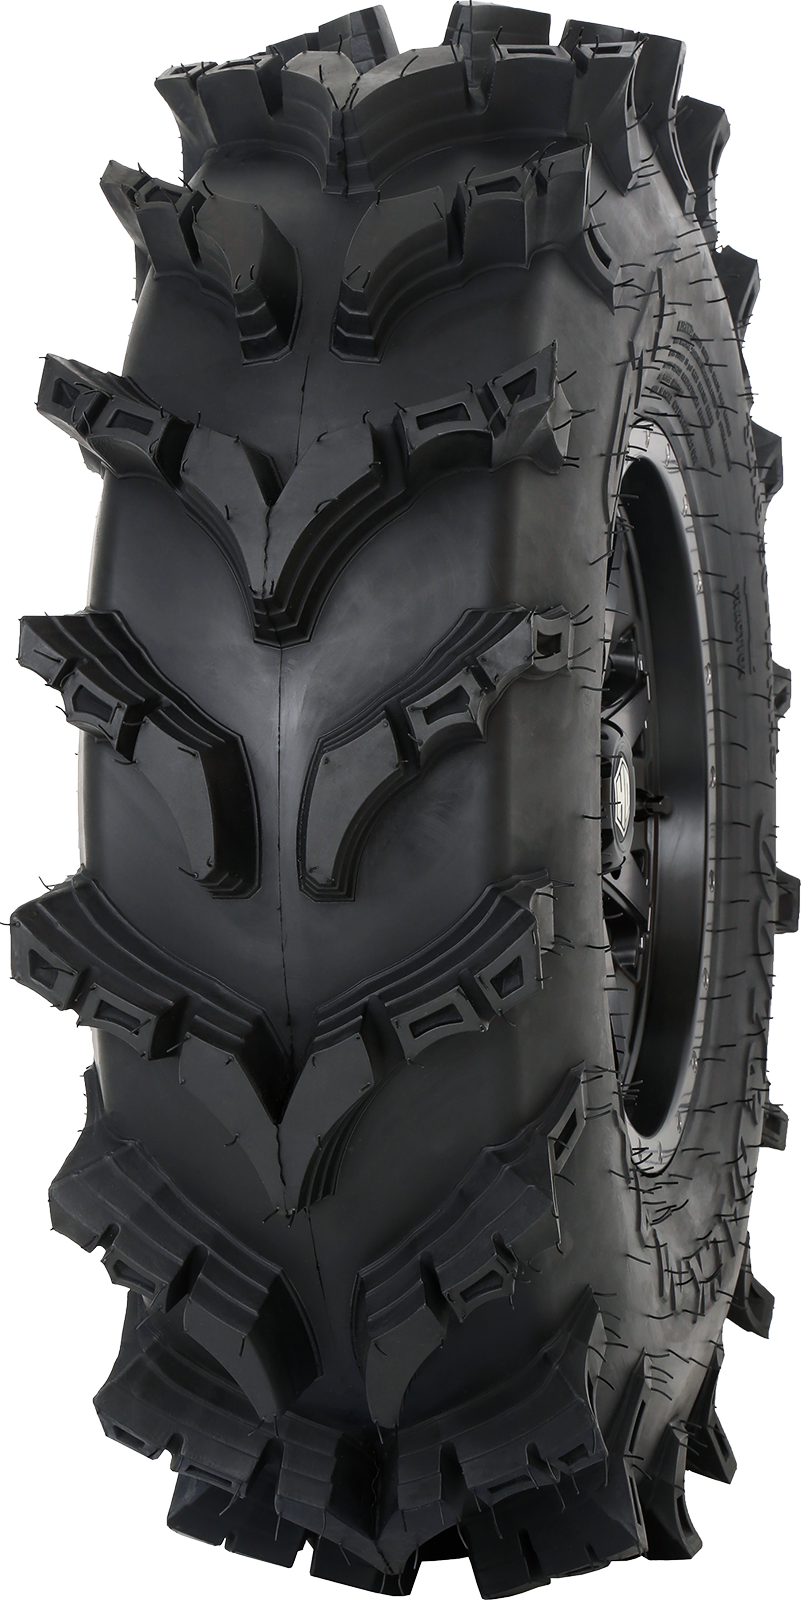 STI TIRE & WHEEL Tire - Out & Back Max - Front/Rear - 27x10-14 - 8 Ply 001-1323